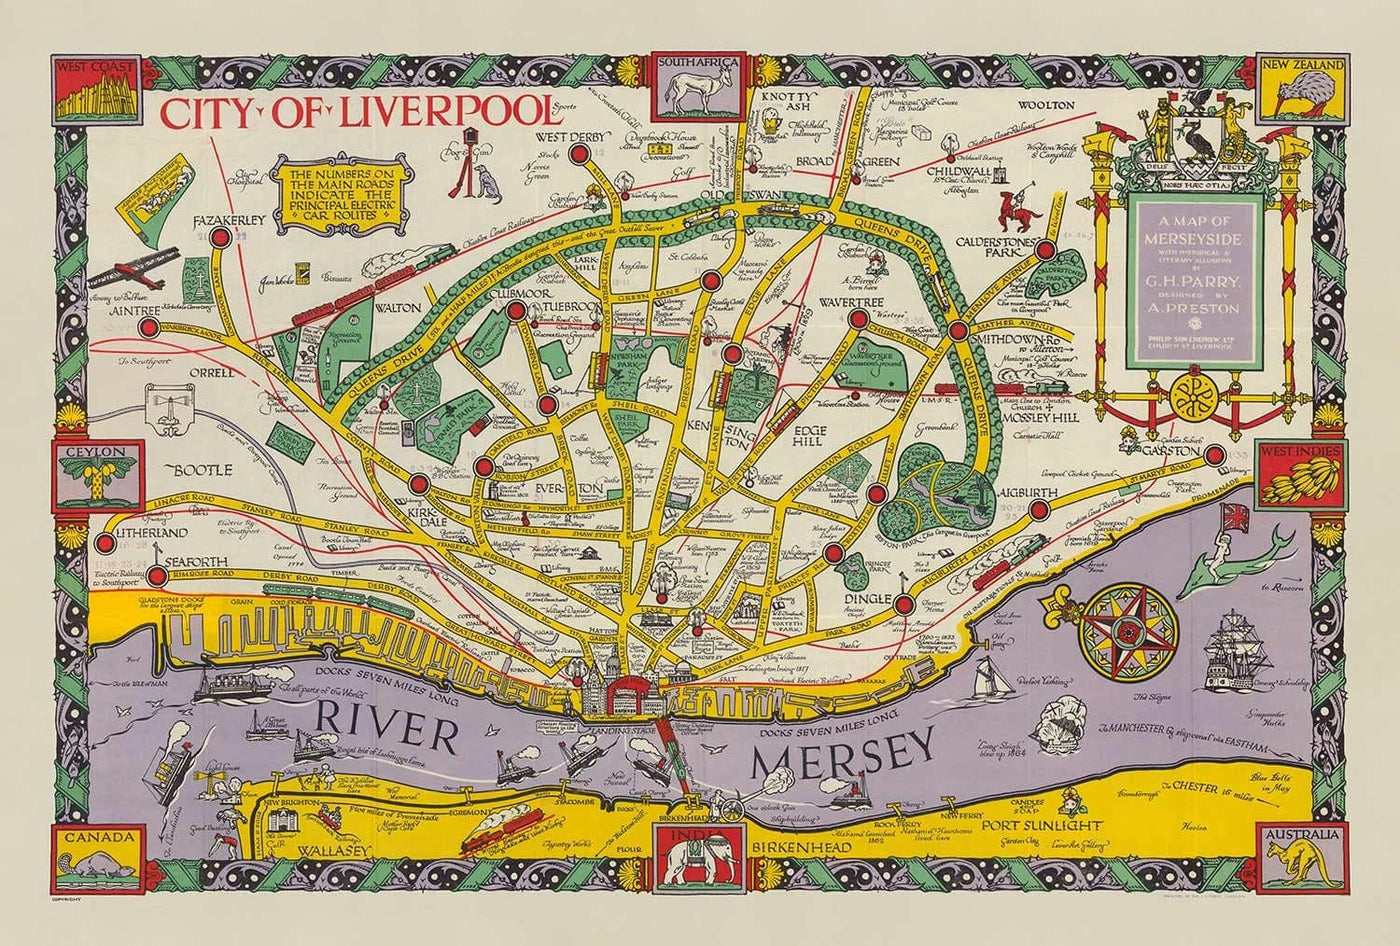 Old Map of Liverpool, 1934 by GH Parry - Pictorial City Chart - Mersey, Docks, Parks, Old Buildings